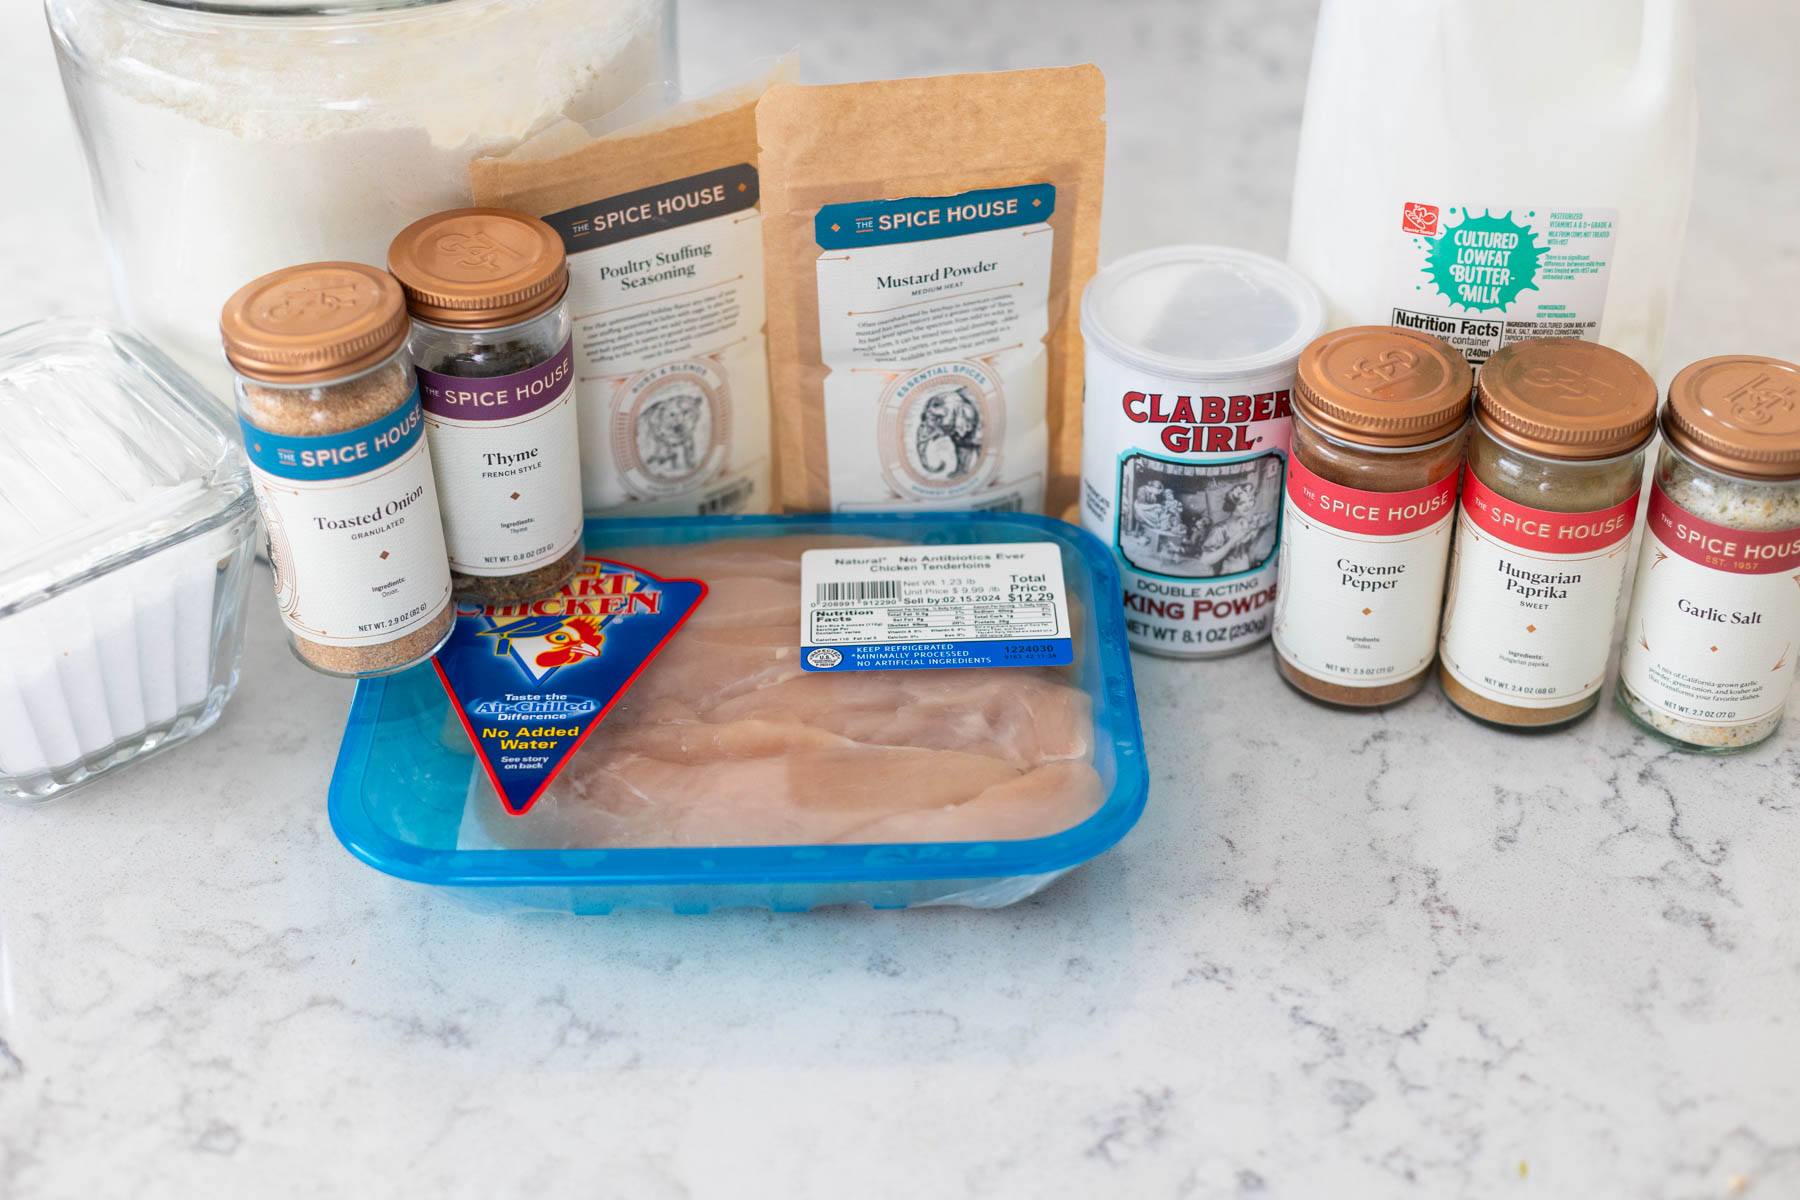 The ingredients to make homemade buttermilk fried chicken in the oven are on the counter.